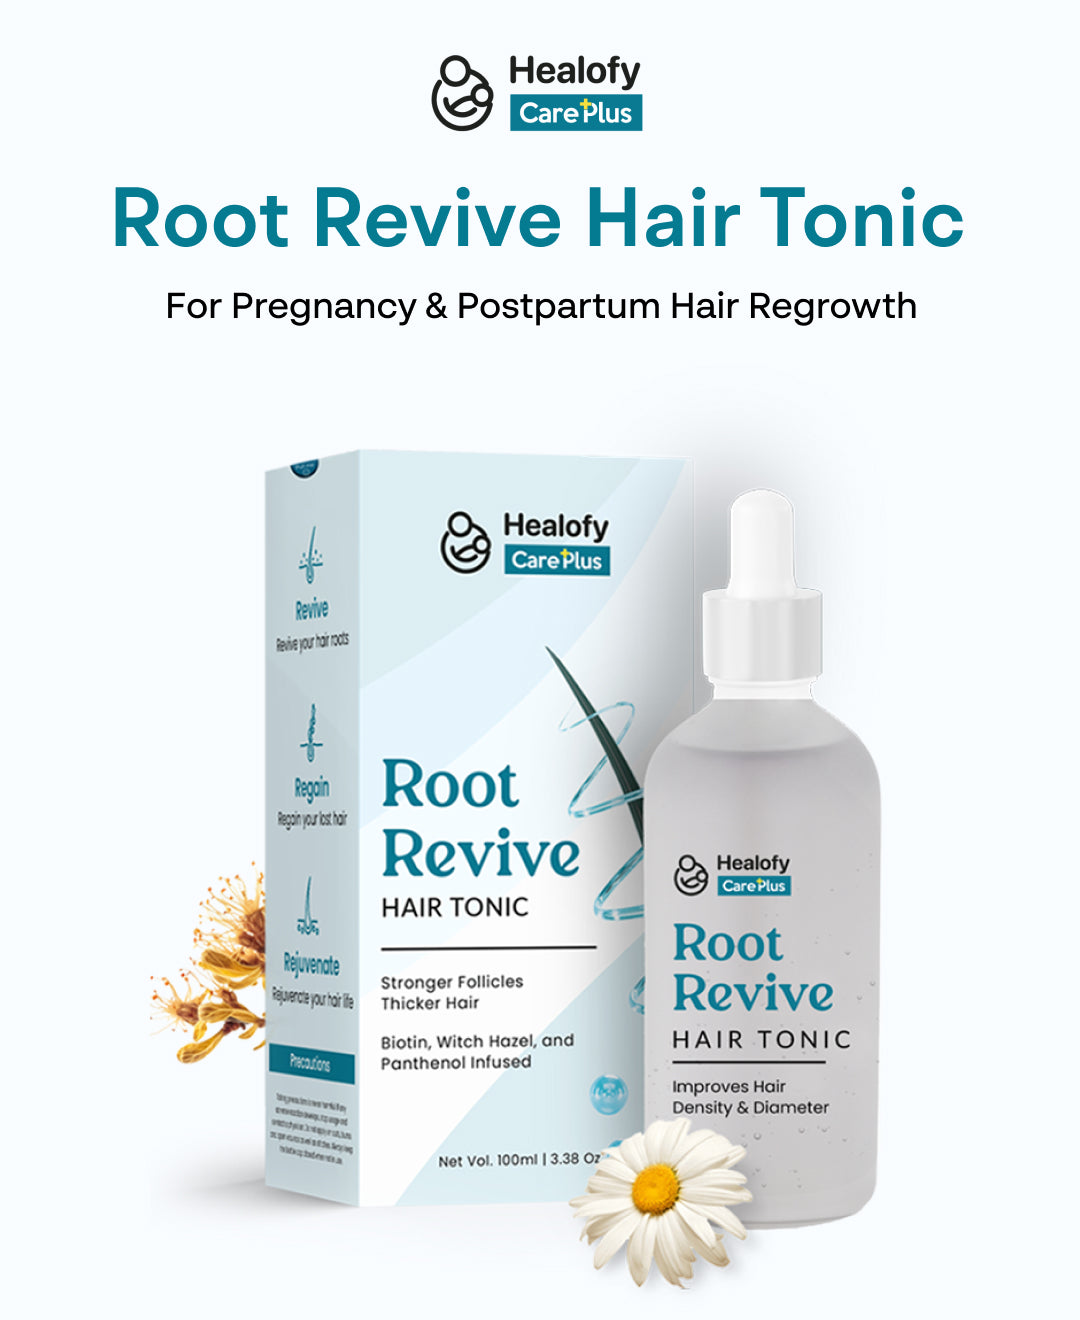 Healofy Care Plus - Root Revive Hair Tonic (To be applied on Scalp)